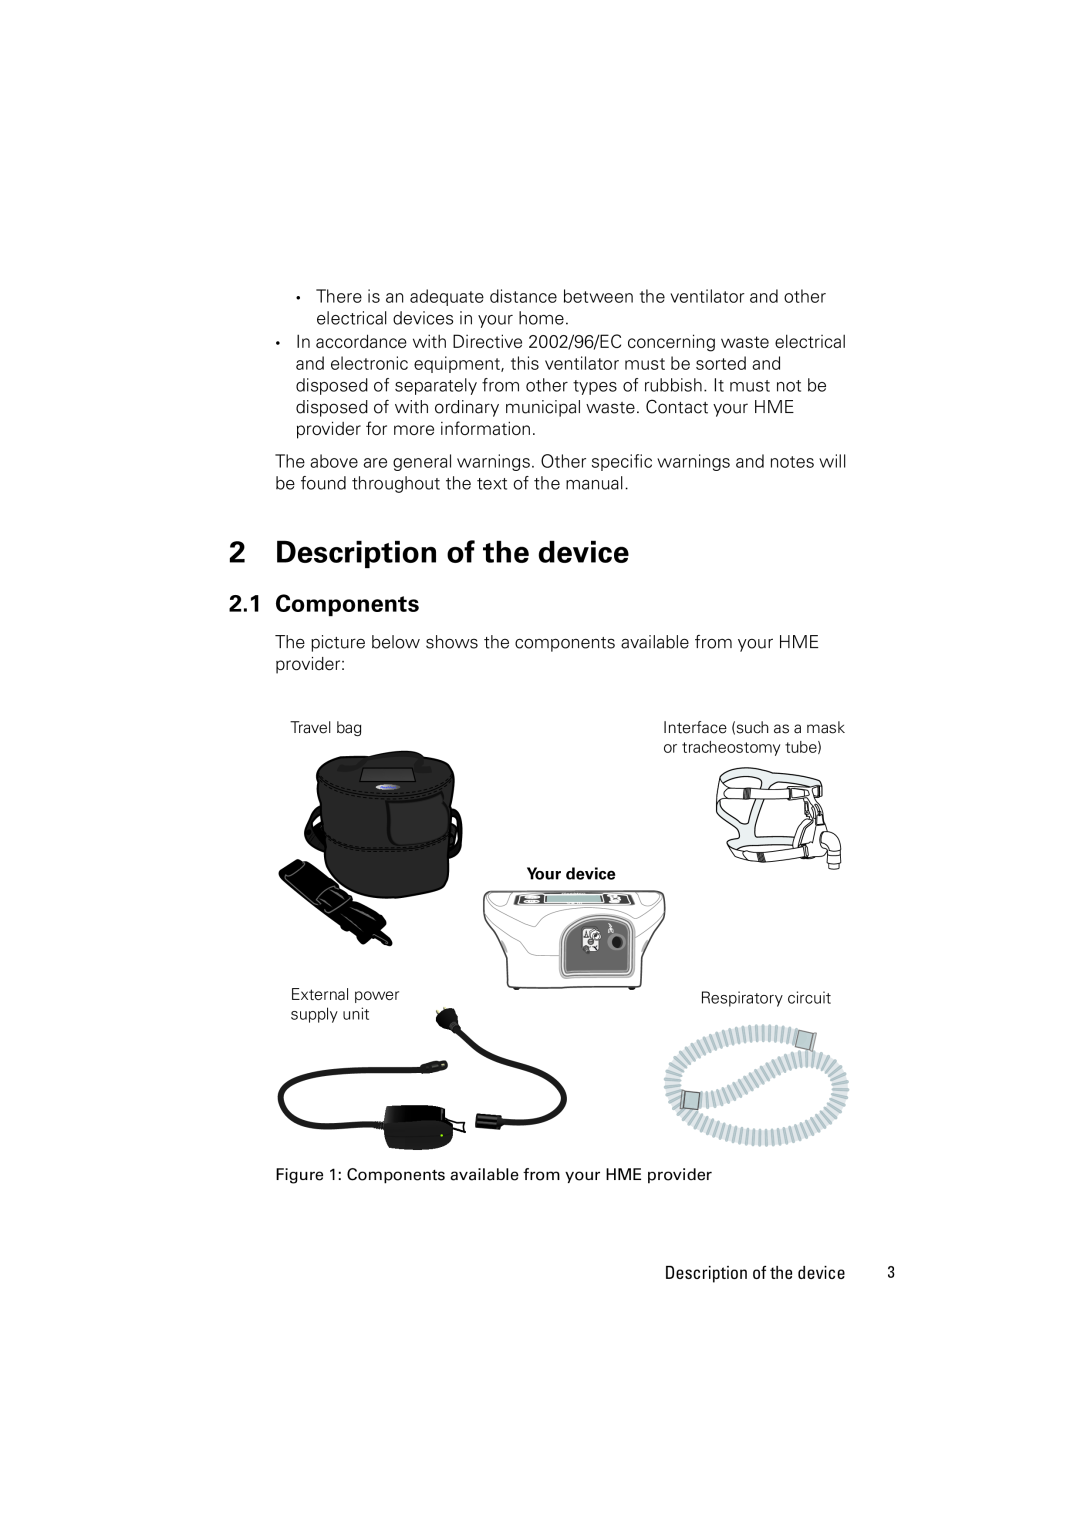 ResMed VS III user manual Description of the device, Components 